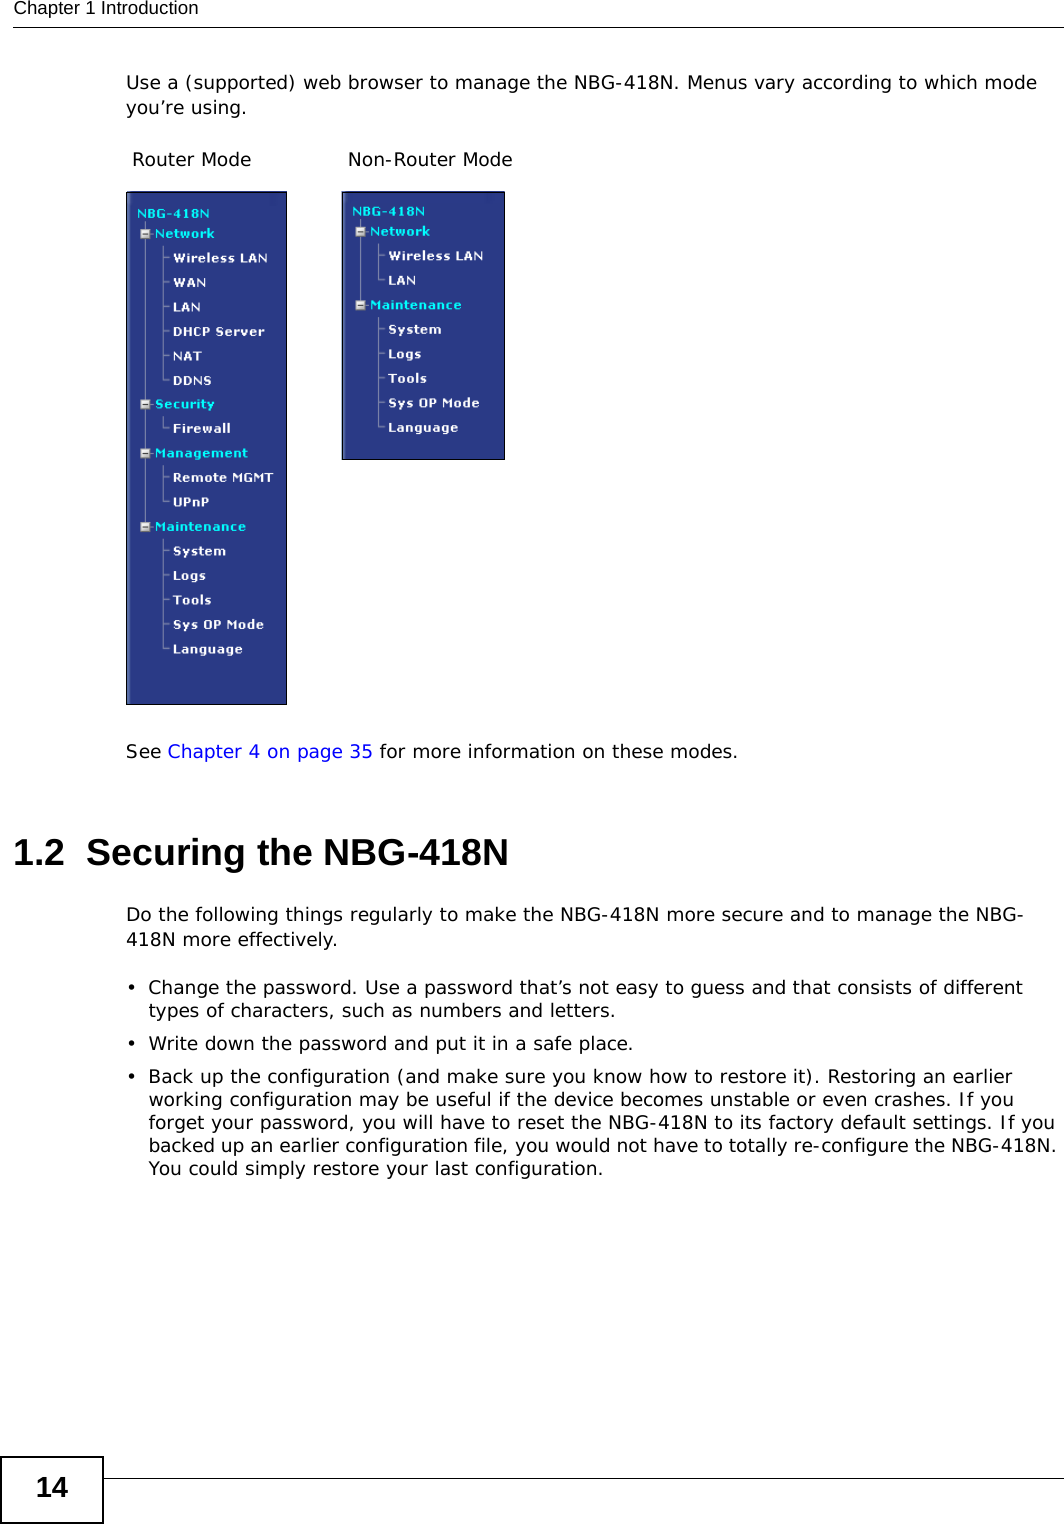 Chapter 1 Introduction14Use a (supported) web browser to manage the NBG-418N. Menus vary according to which mode you’re using.See Chapter 4 on page 35 for more information on these modes.1.2  Securing the NBG-418NDo the following things regularly to make the NBG-418N more secure and to manage the NBG-418N more effectively.• Change the password. Use a password that’s not easy to guess and that consists of different types of characters, such as numbers and letters.• Write down the password and put it in a safe place.• Back up the configuration (and make sure you know how to restore it). Restoring an earlier working configuration may be useful if the device becomes unstable or even crashes. If you forget your password, you will have to reset the NBG-418N to its factory default settings. If you backed up an earlier configuration file, you would not have to totally re-configure the NBG-418N. You could simply restore your last configuration.Router Mode Non-Router Mode